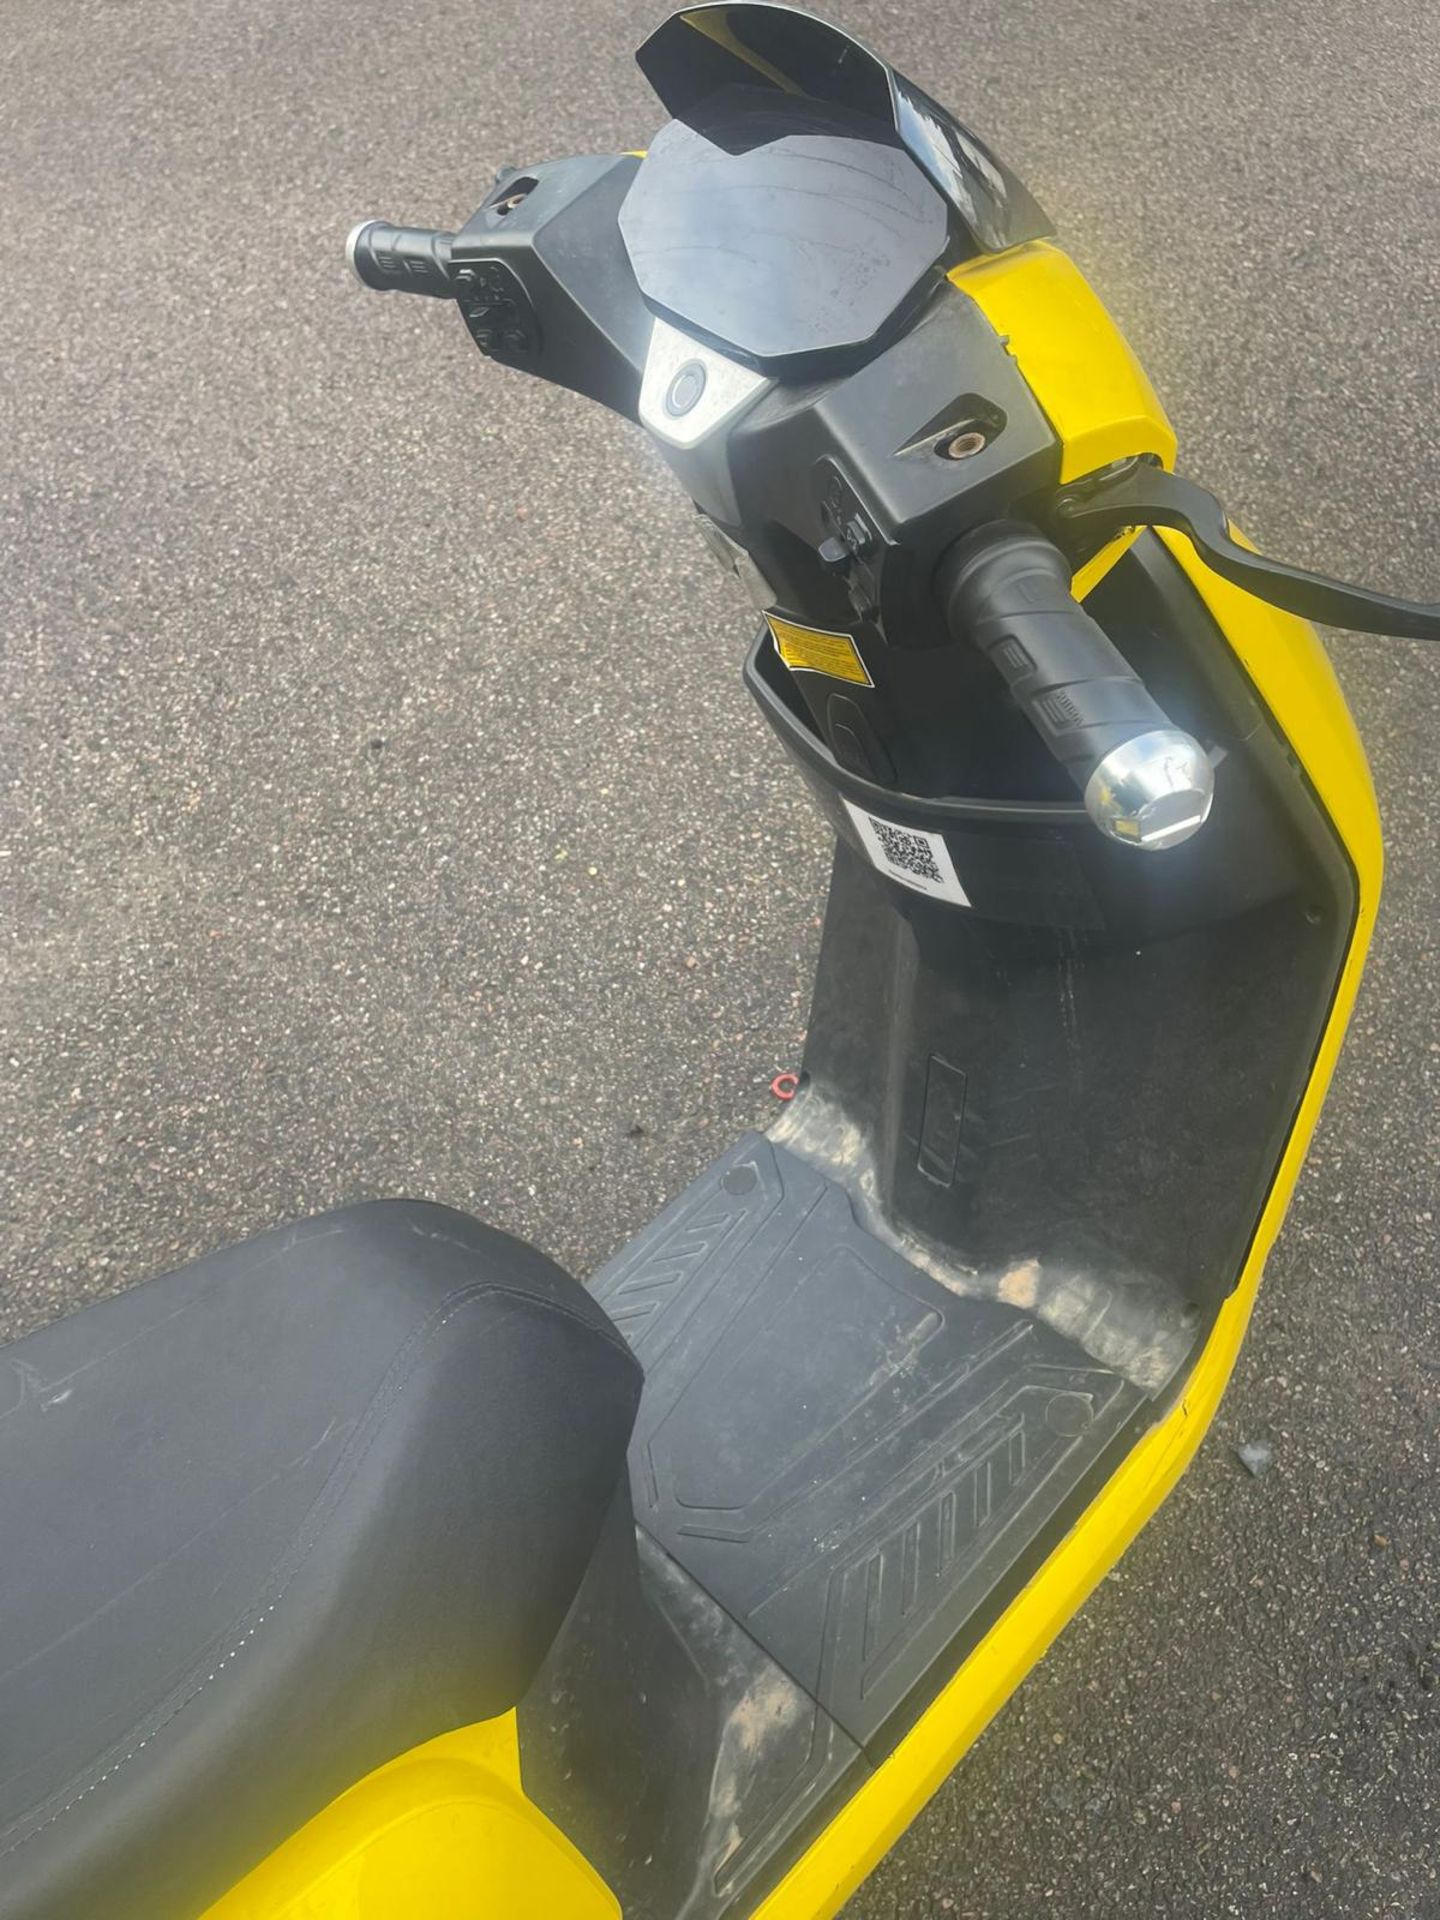 10 x Niu GTS & Sunra Robo S Electric Moped Scooters With Logbooks, Keys & Spares - Image 47 of 61